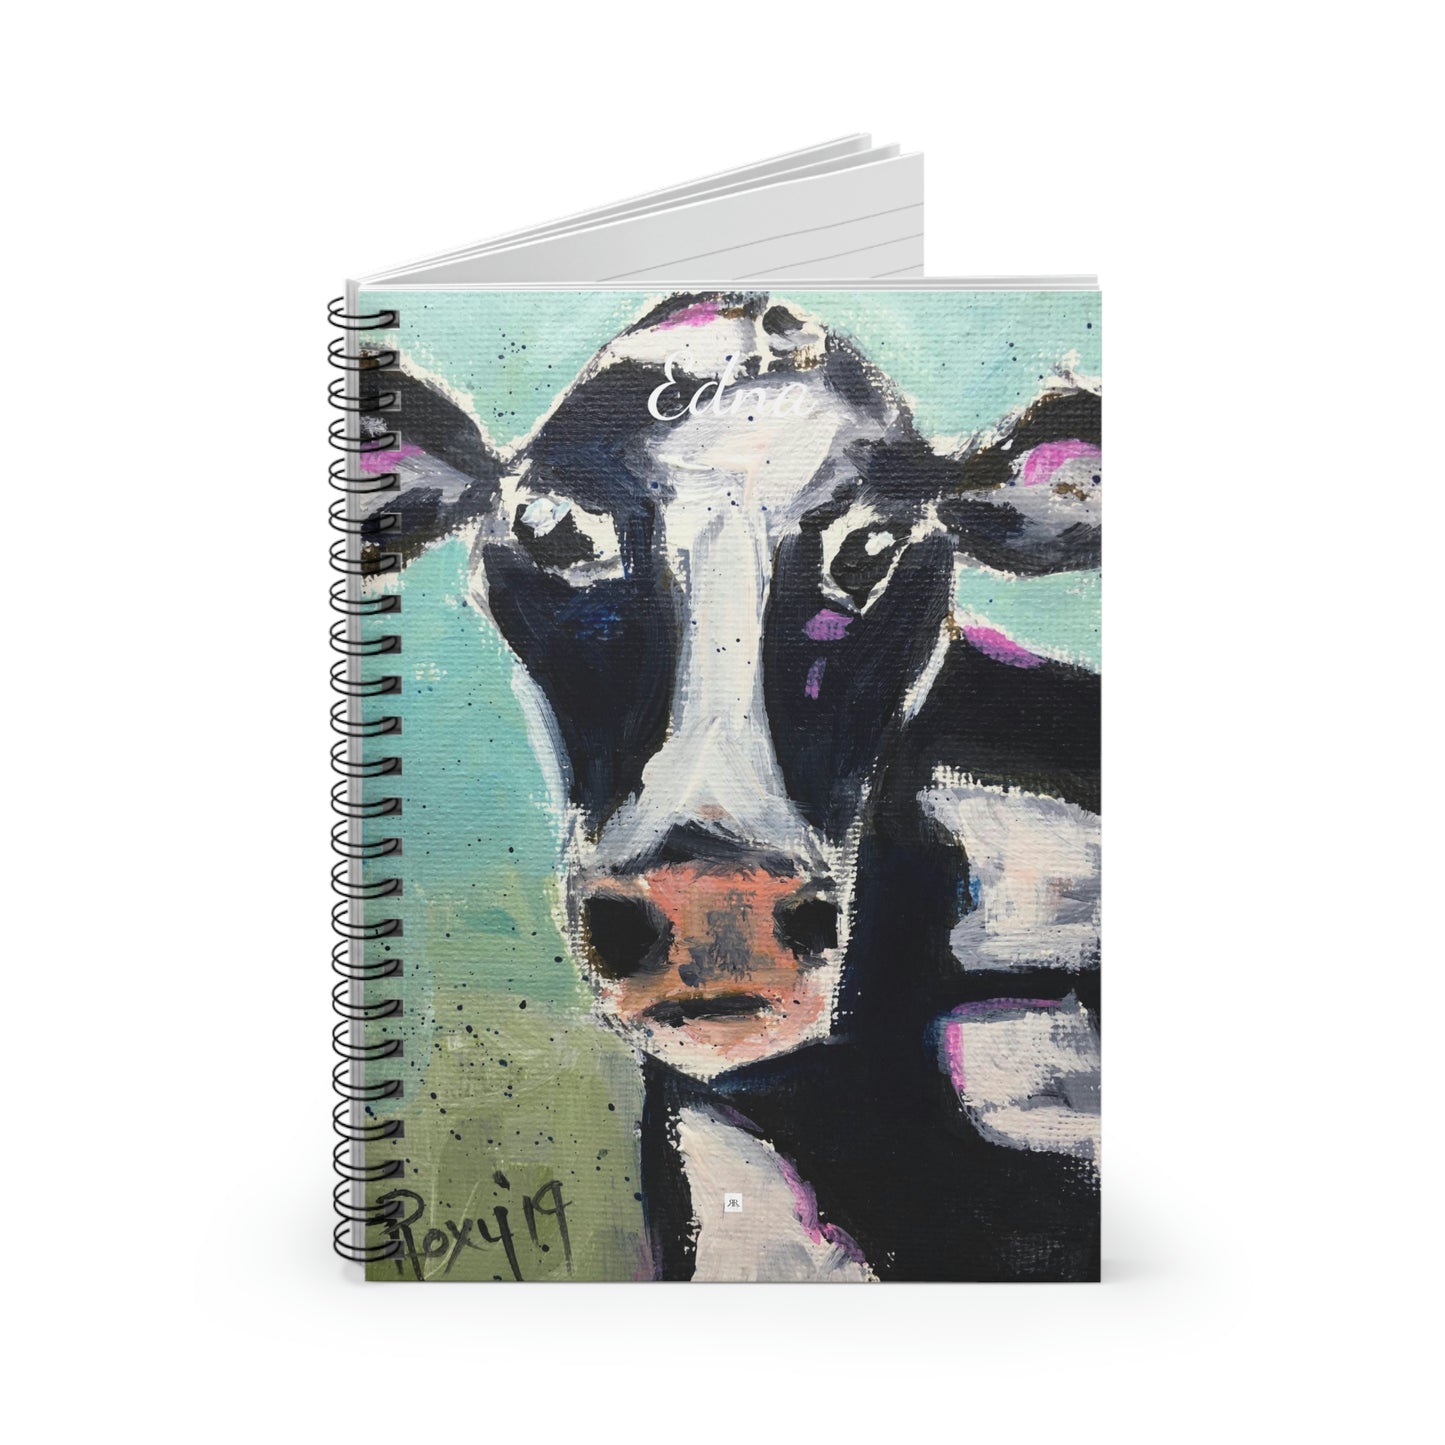 Edna Cow - Whimsical Cow Painting Spiral Notebook